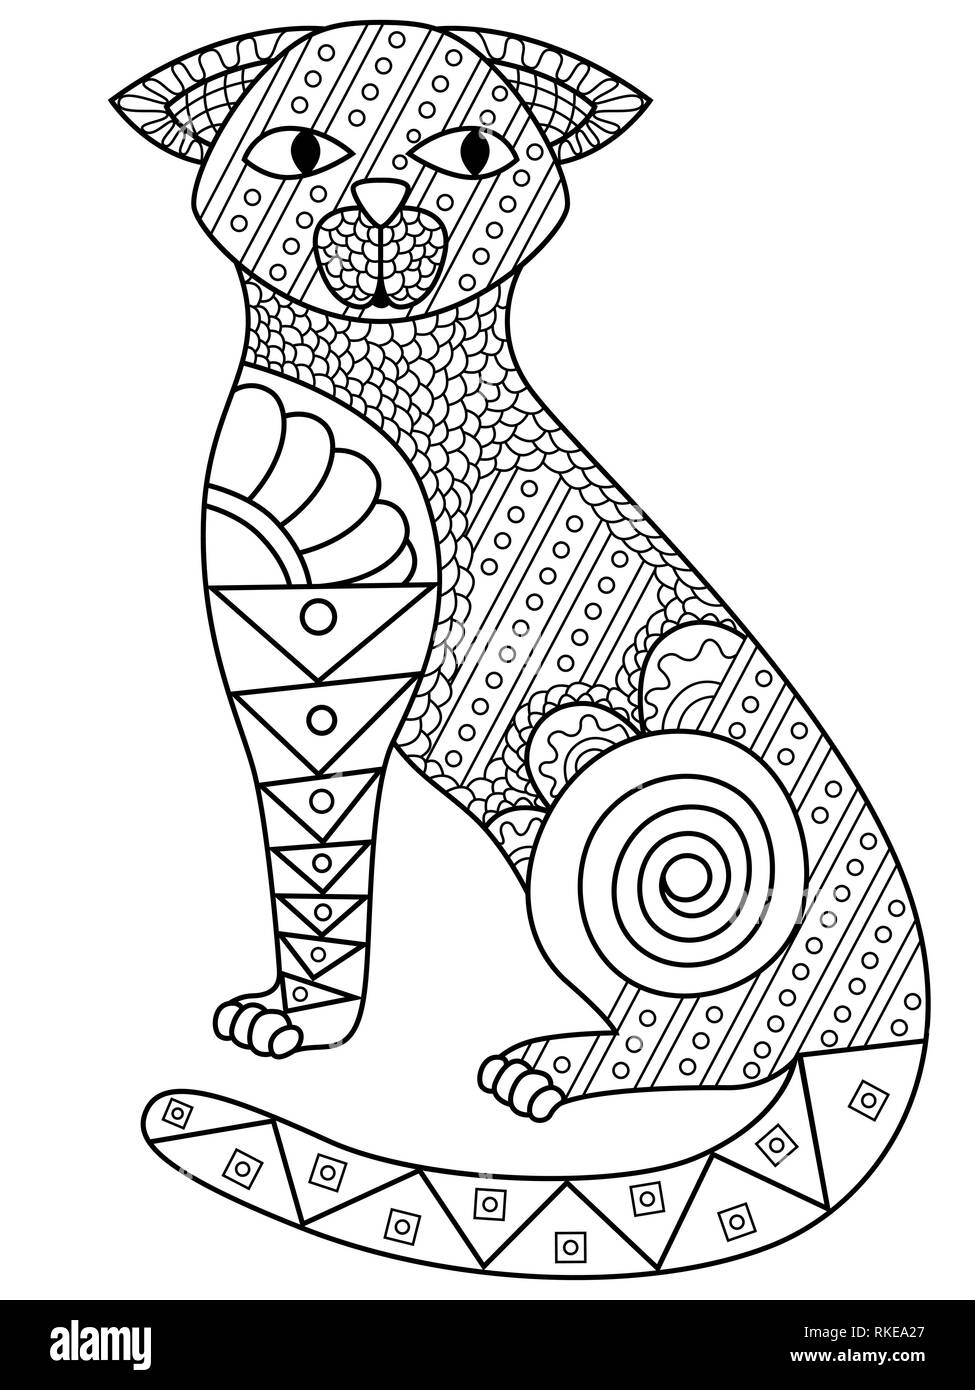 Black cat body contour decorated with zentangle patterns, vector on the white background Stock Vector